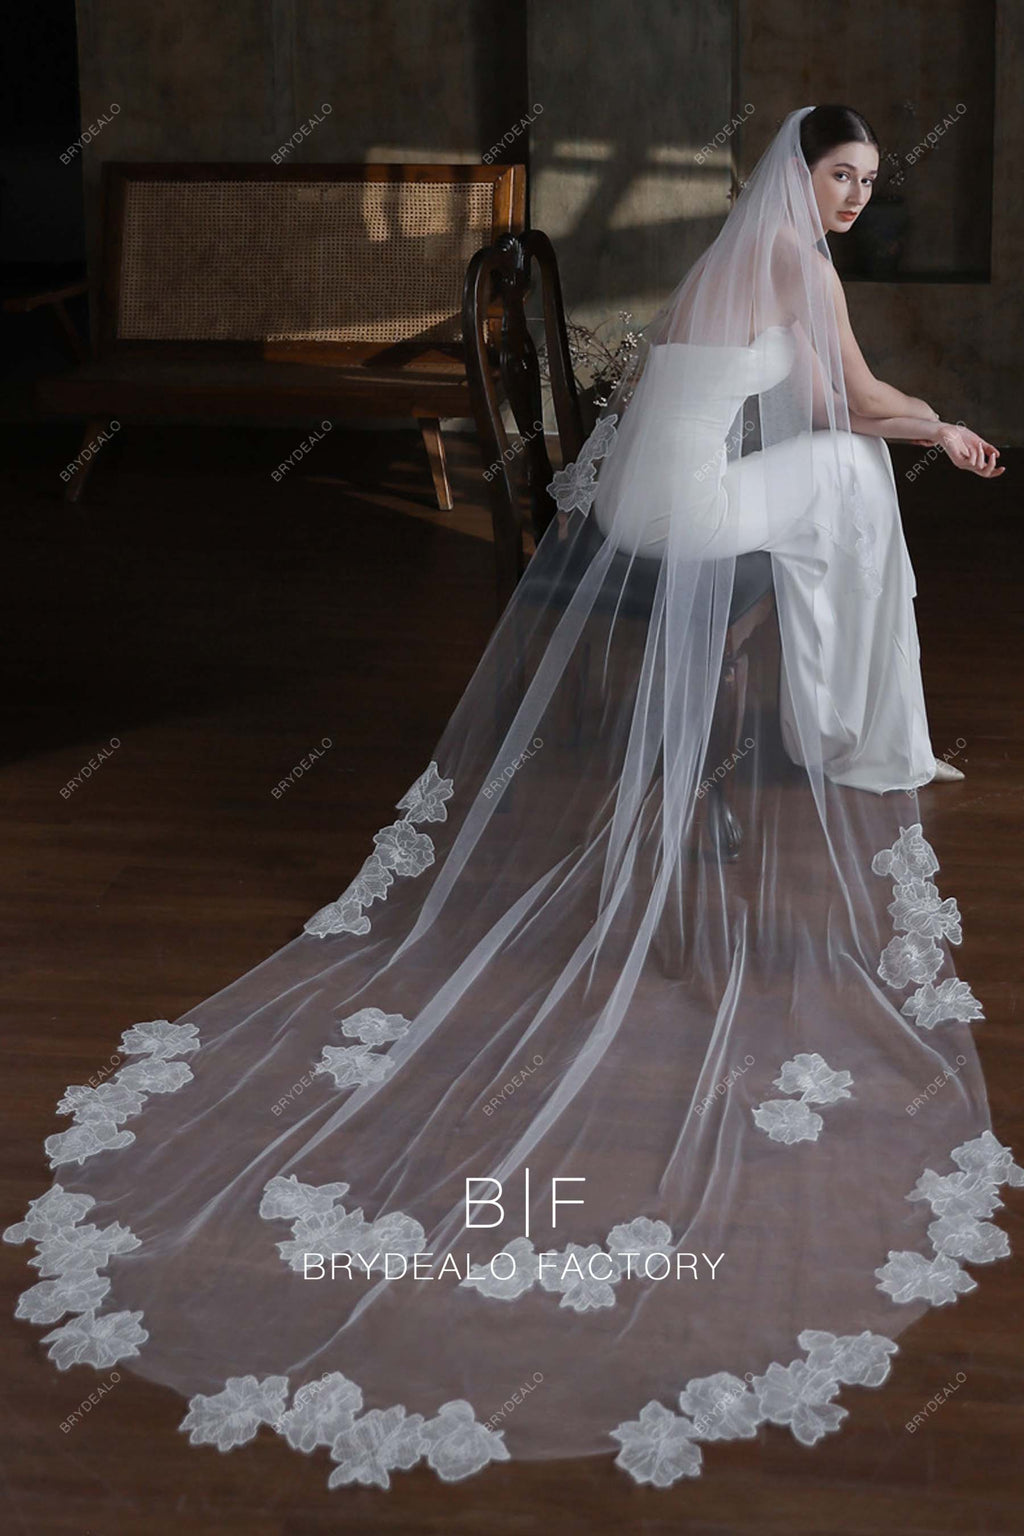 Chapel Length Wedding Veil with Couture Lace (#BELLA) Chapel Length